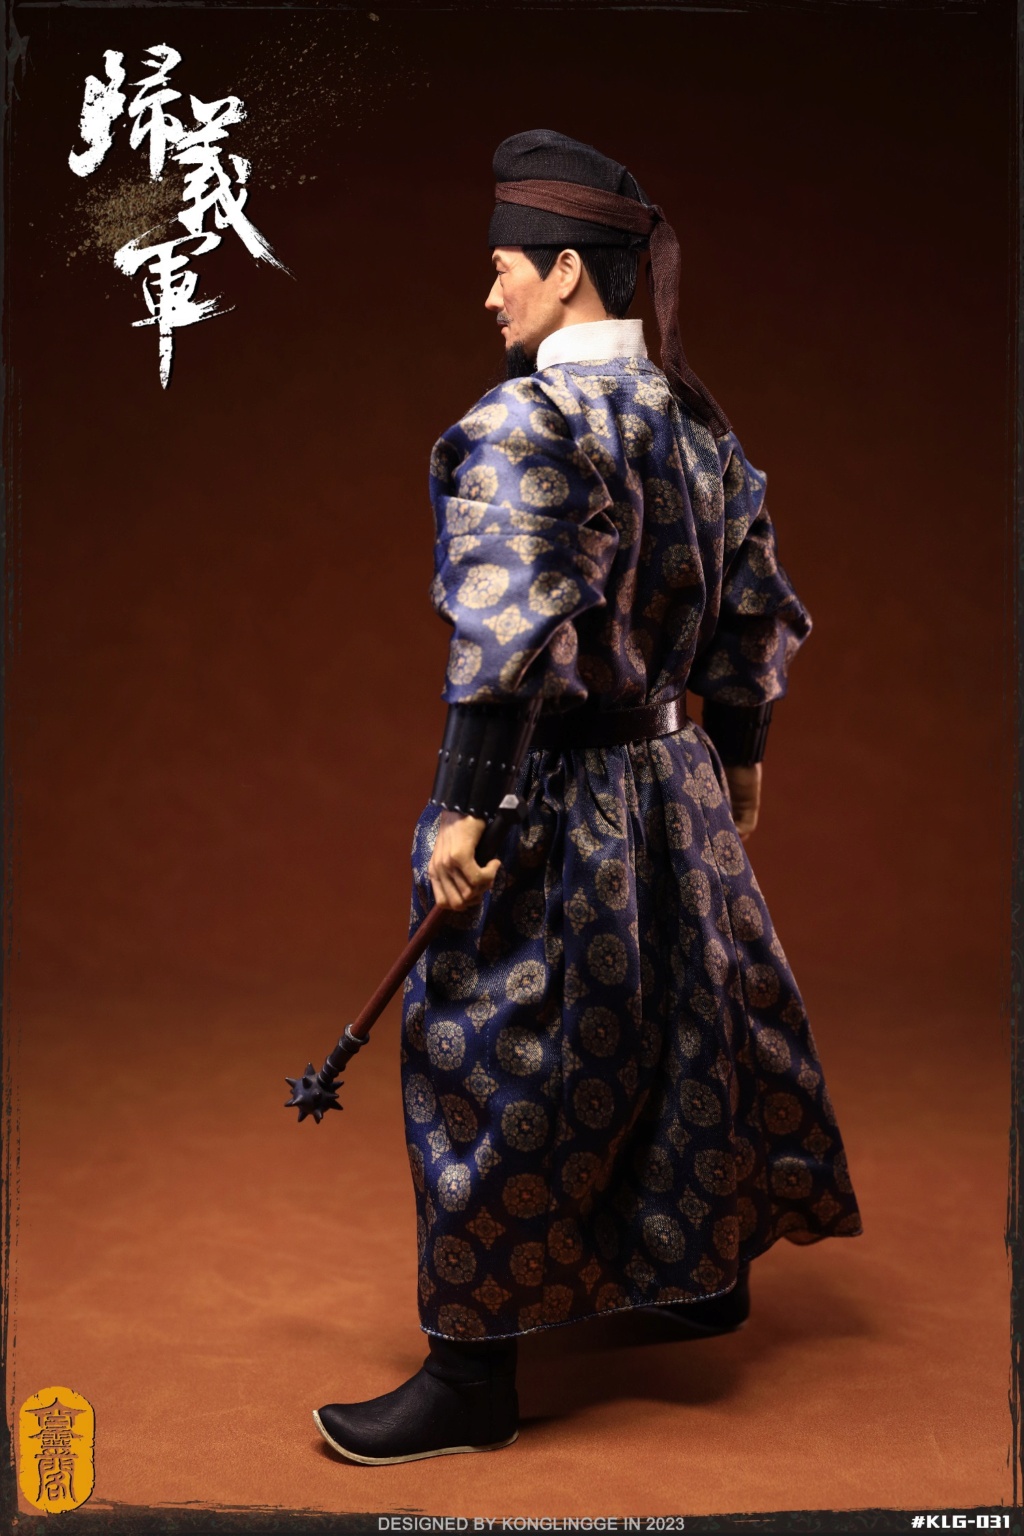 KLG-R031 - NEW PRODUCT: KongLingGe: 1/6 scale Guiyi Army (848-1036 AD) action figure （#KLG-R031） 14031610